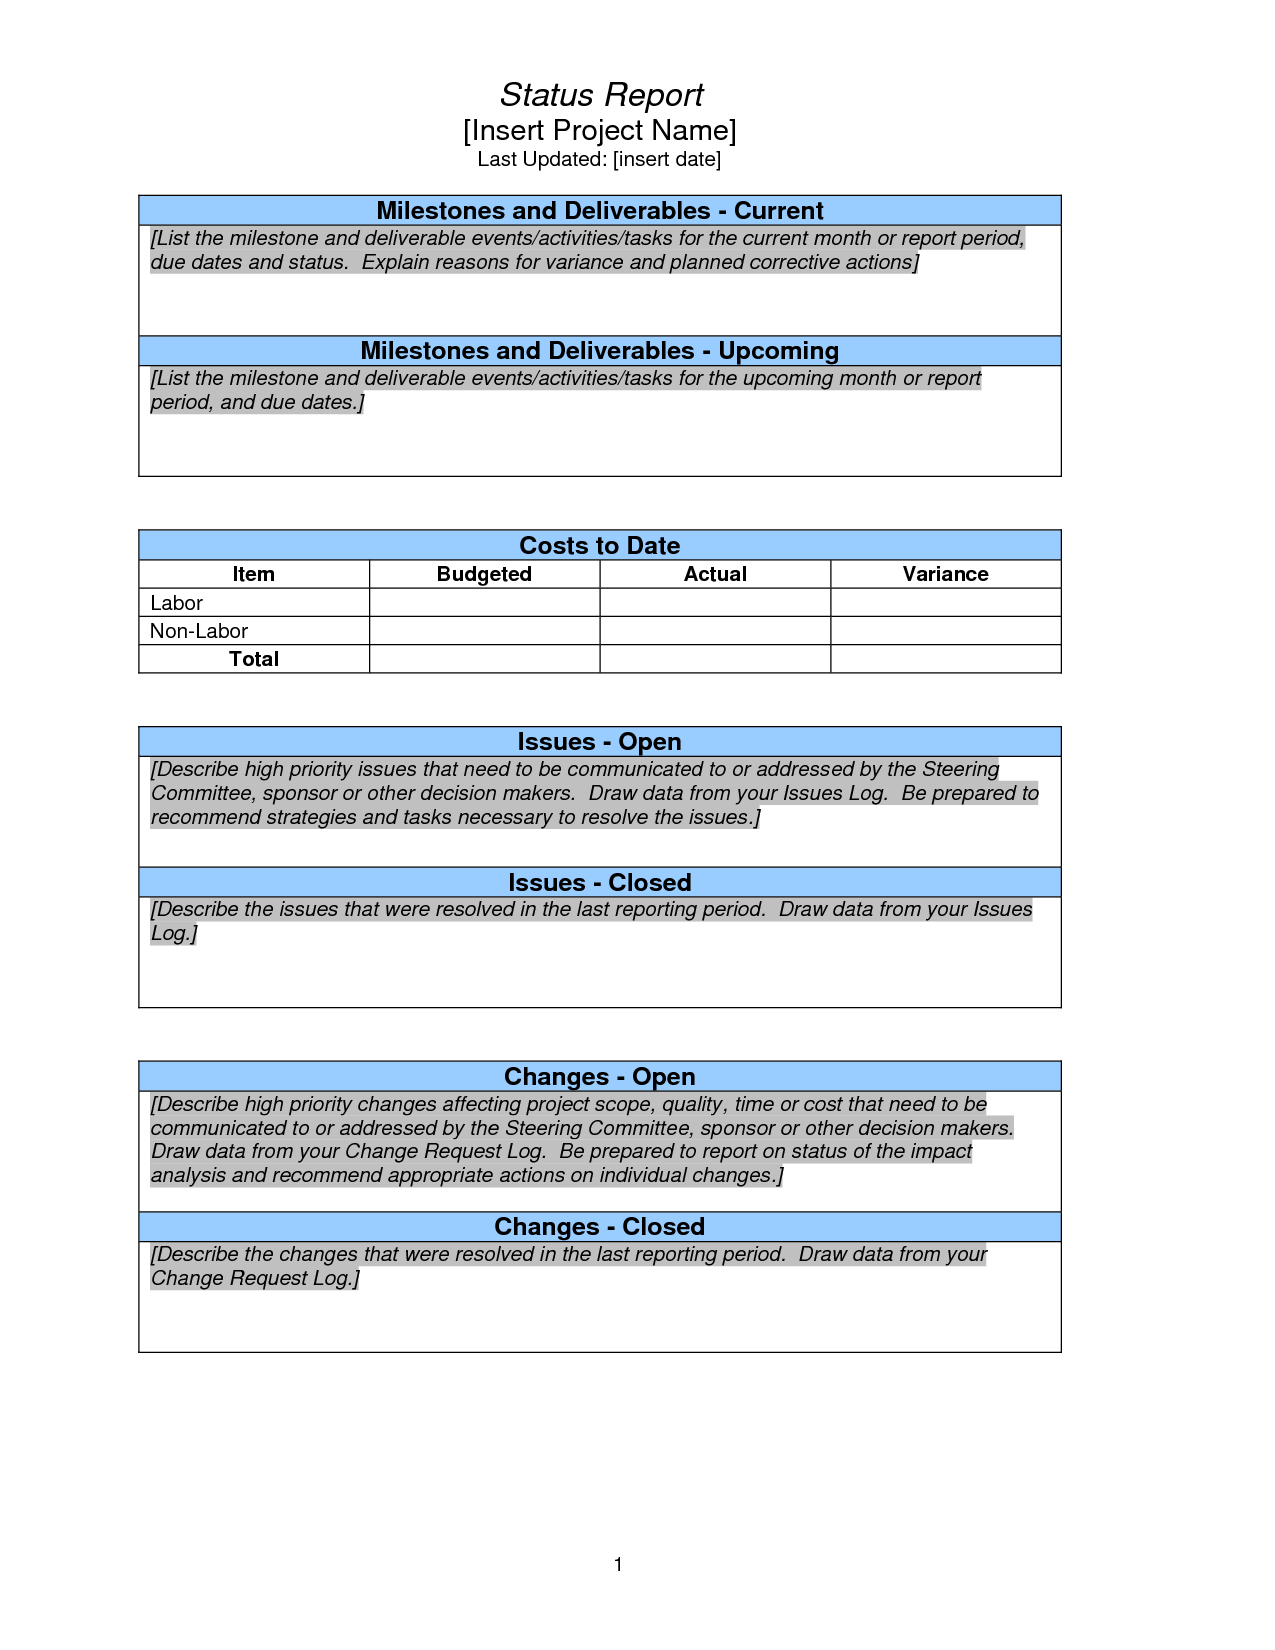 Project Status Report Sample | Pmp | Project Status Report In Strategic Management Report Template